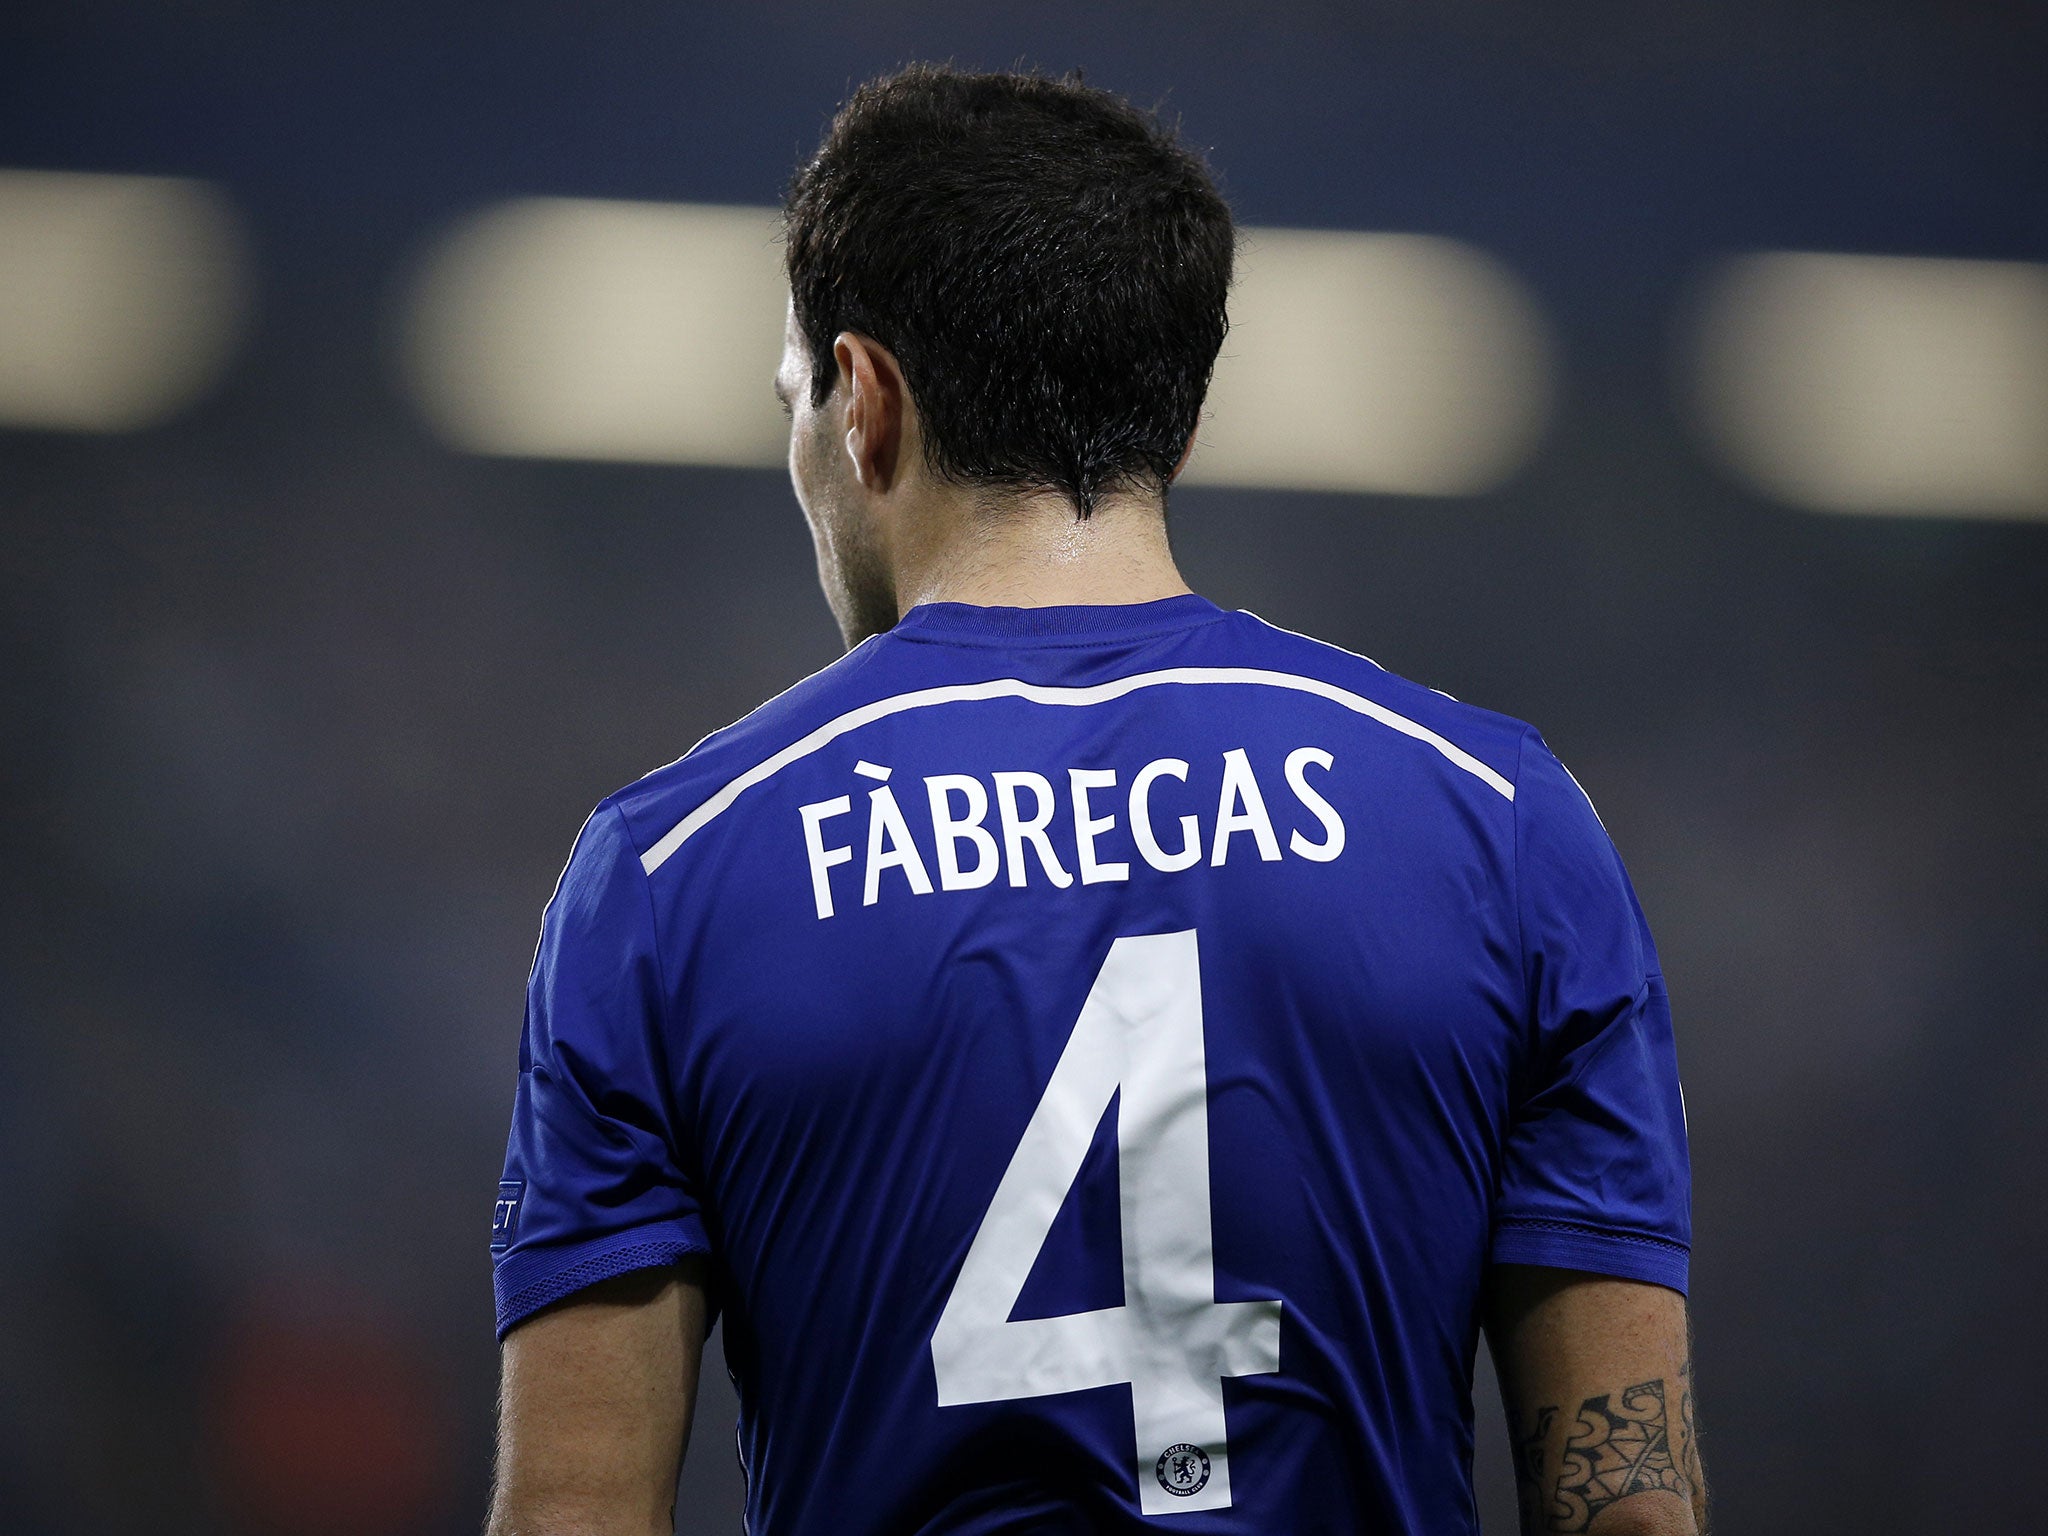 Cesc Fabregas in action during Chelsea's 1-1 draw with Schalke on Wednesday night